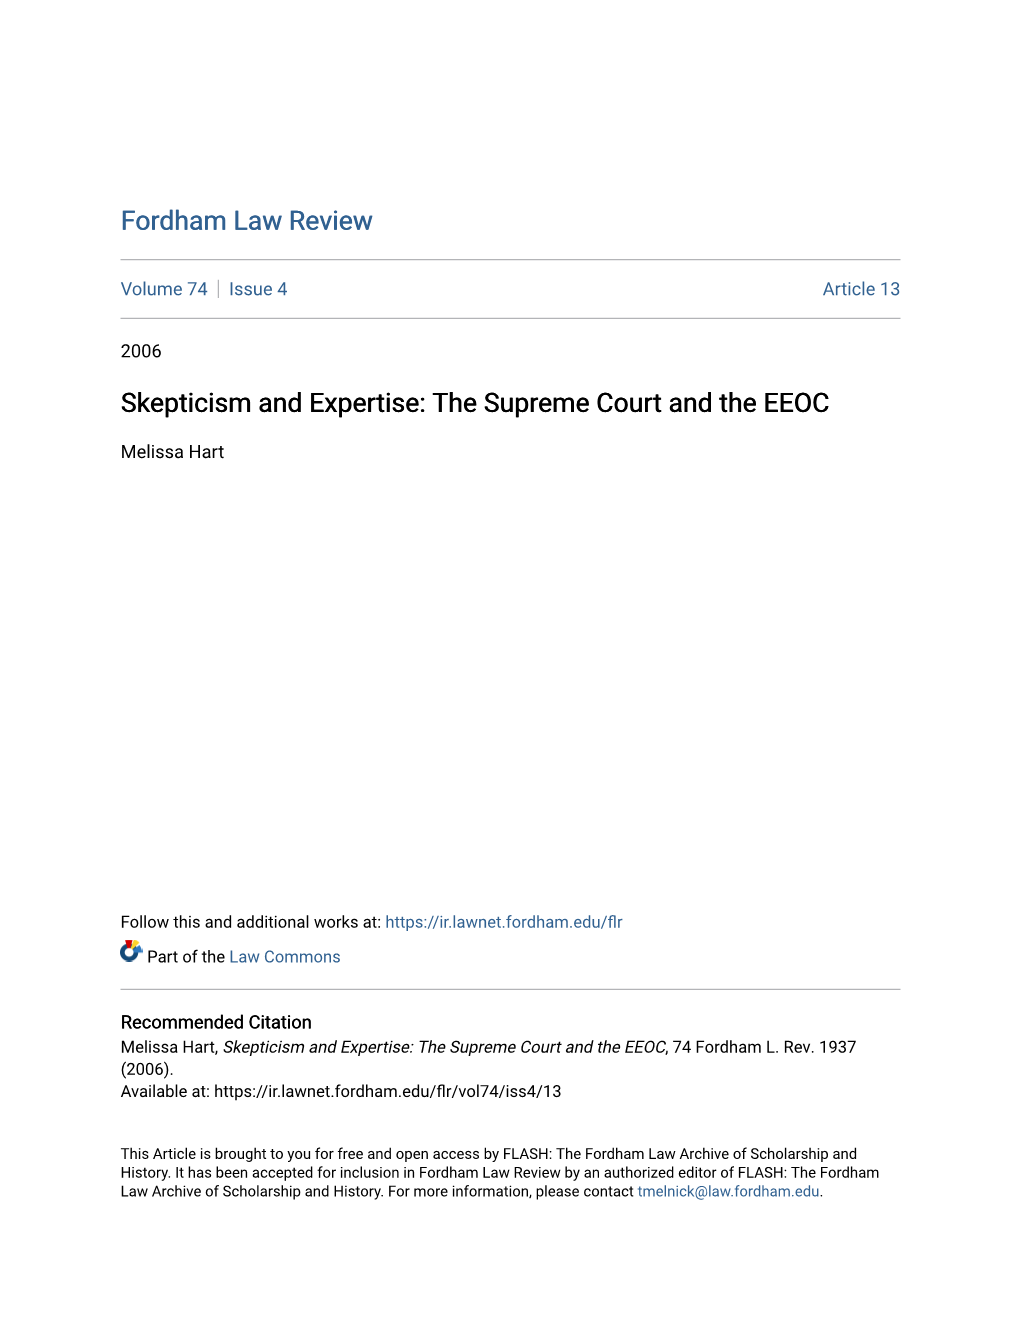 Skepticism and Expertise: the Supreme Court and the EEOC